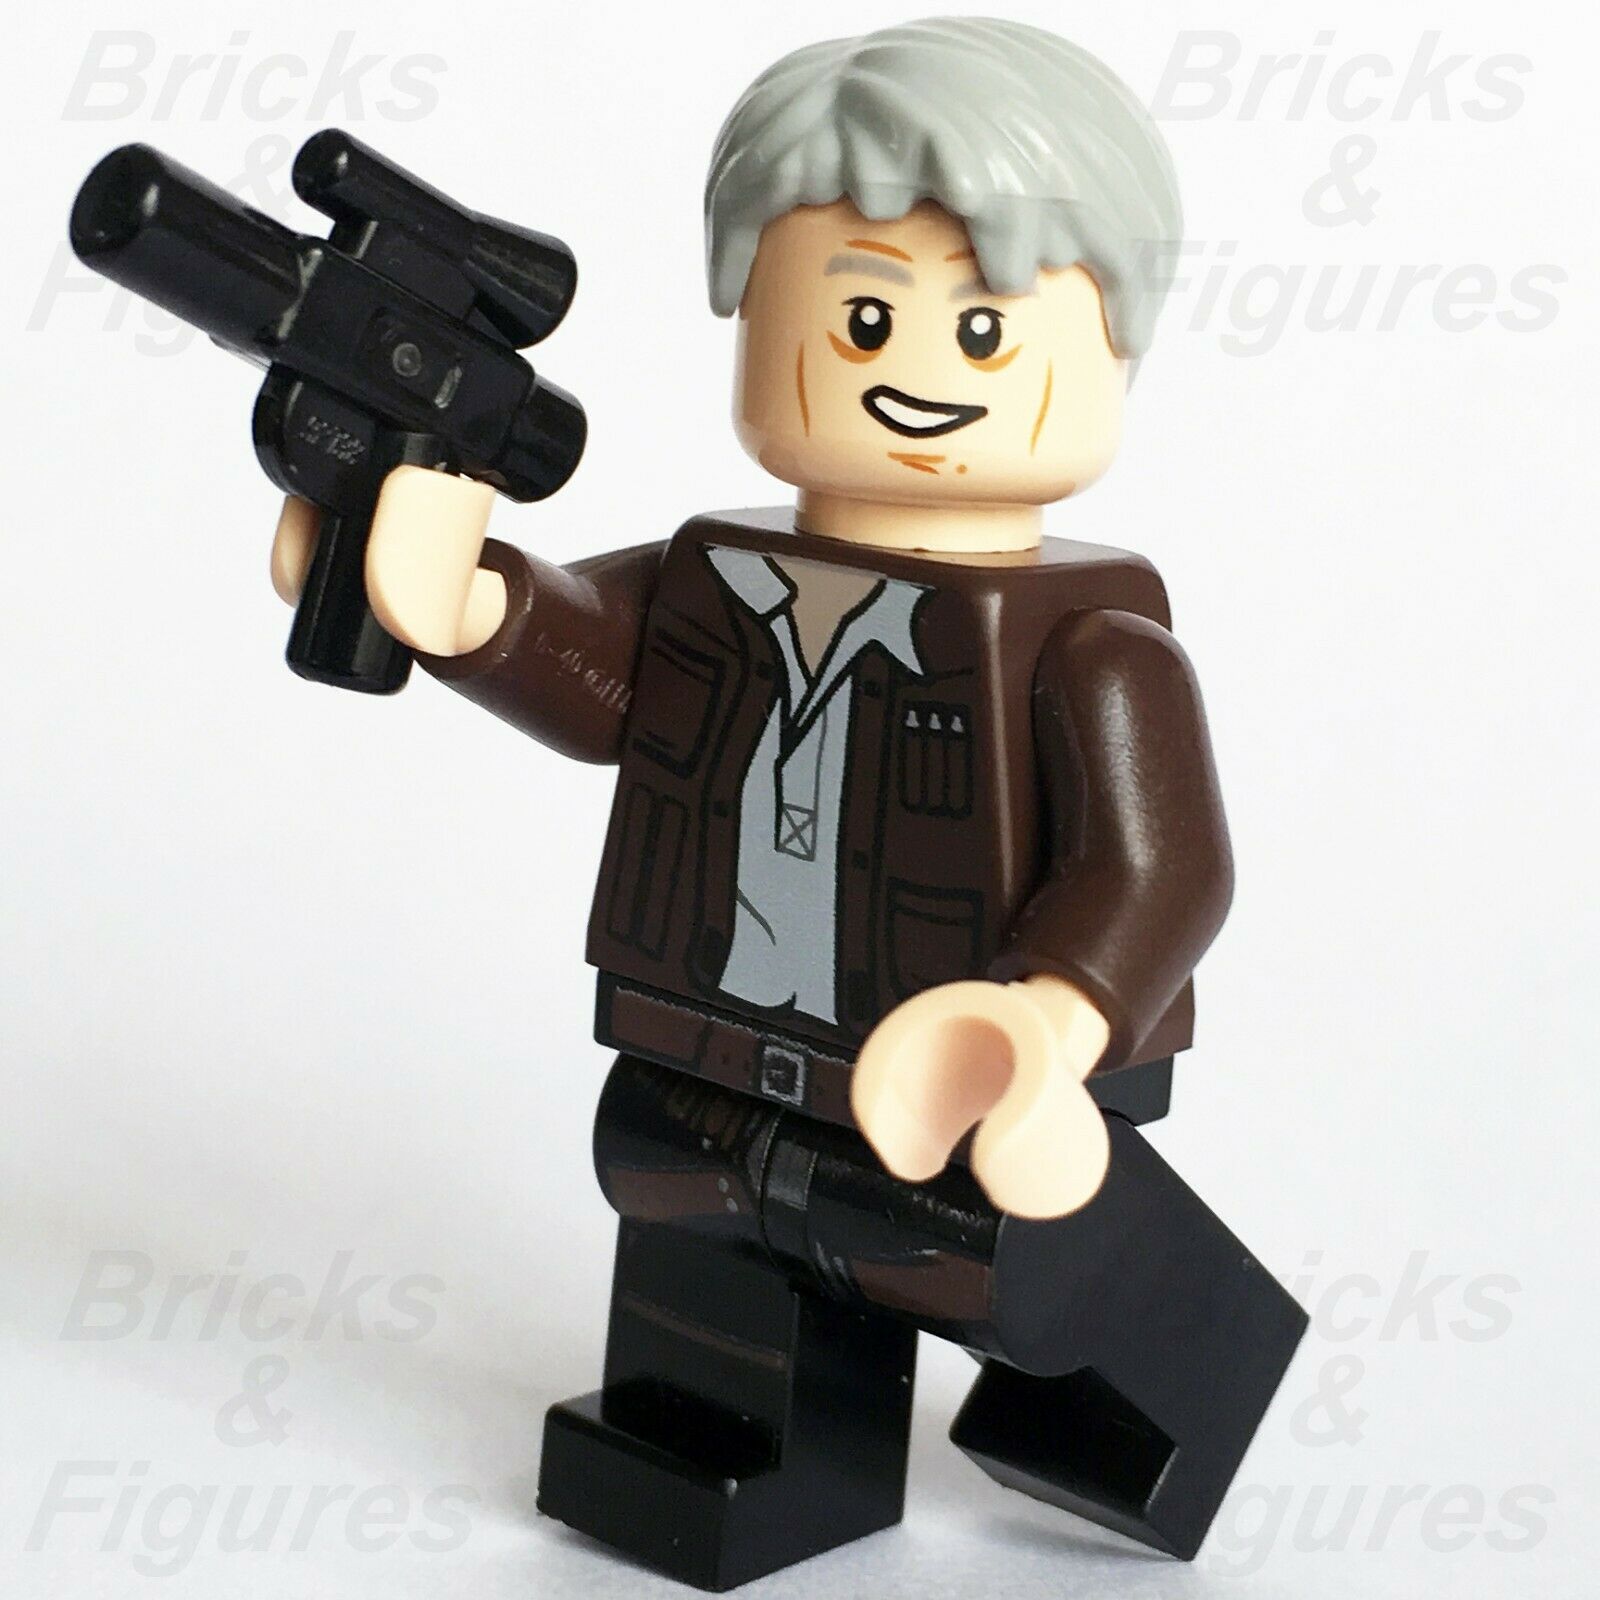 New Star Wars LEGO Han Solo (Old) Resistance The Force Awakens Minifigure 75105 - Bricks & Figures